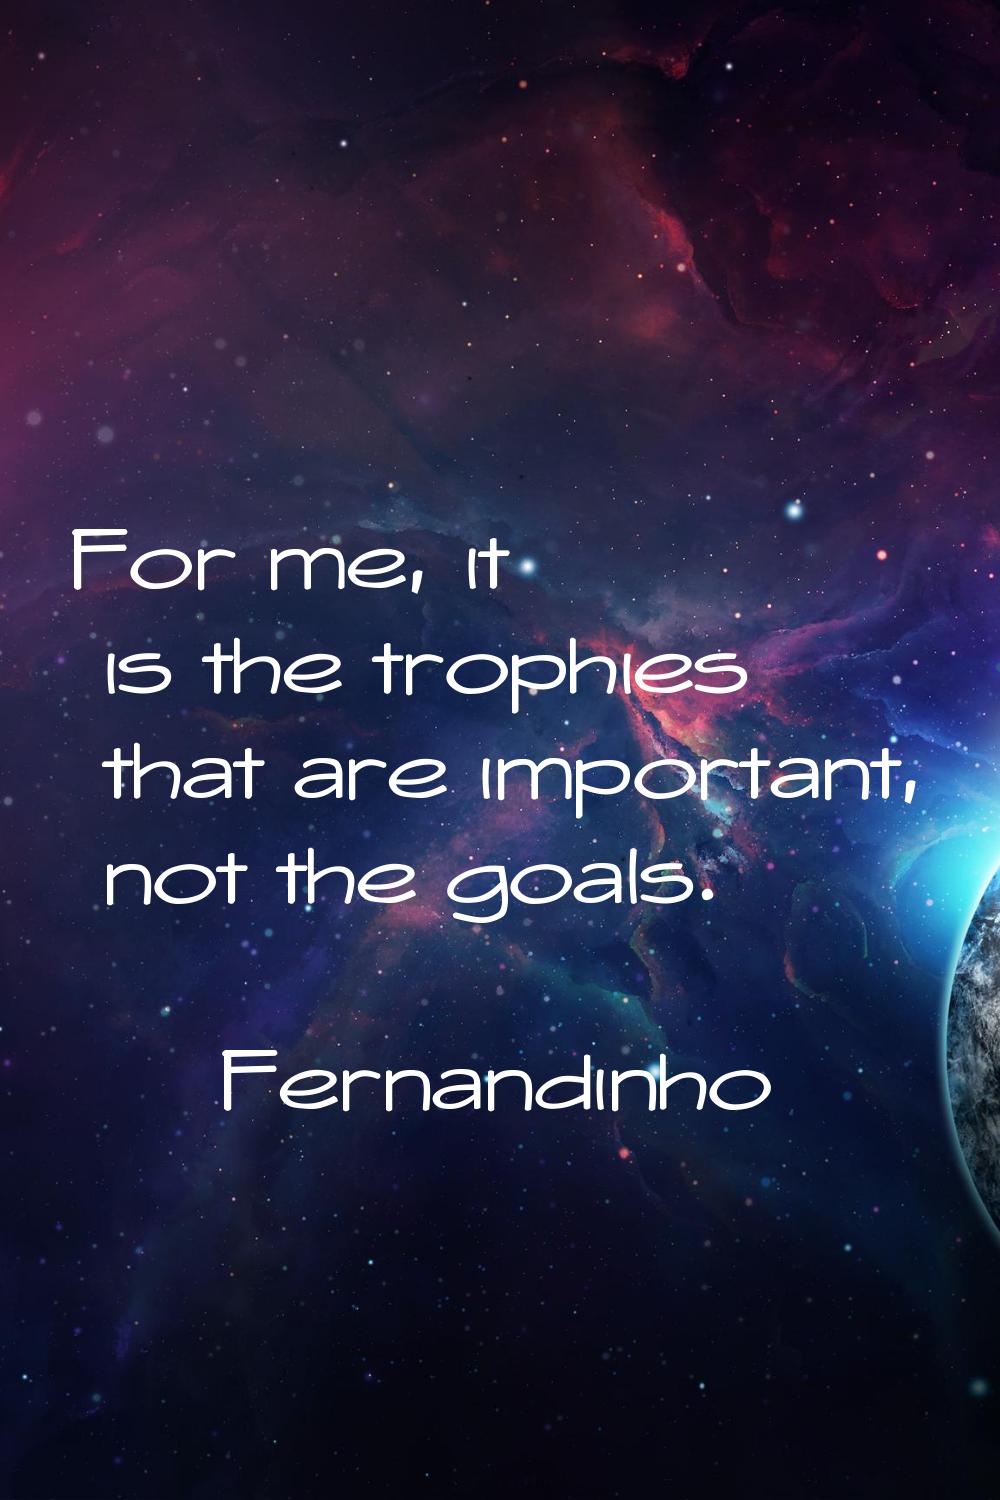 For me, it is the trophies that are important, not the goals.